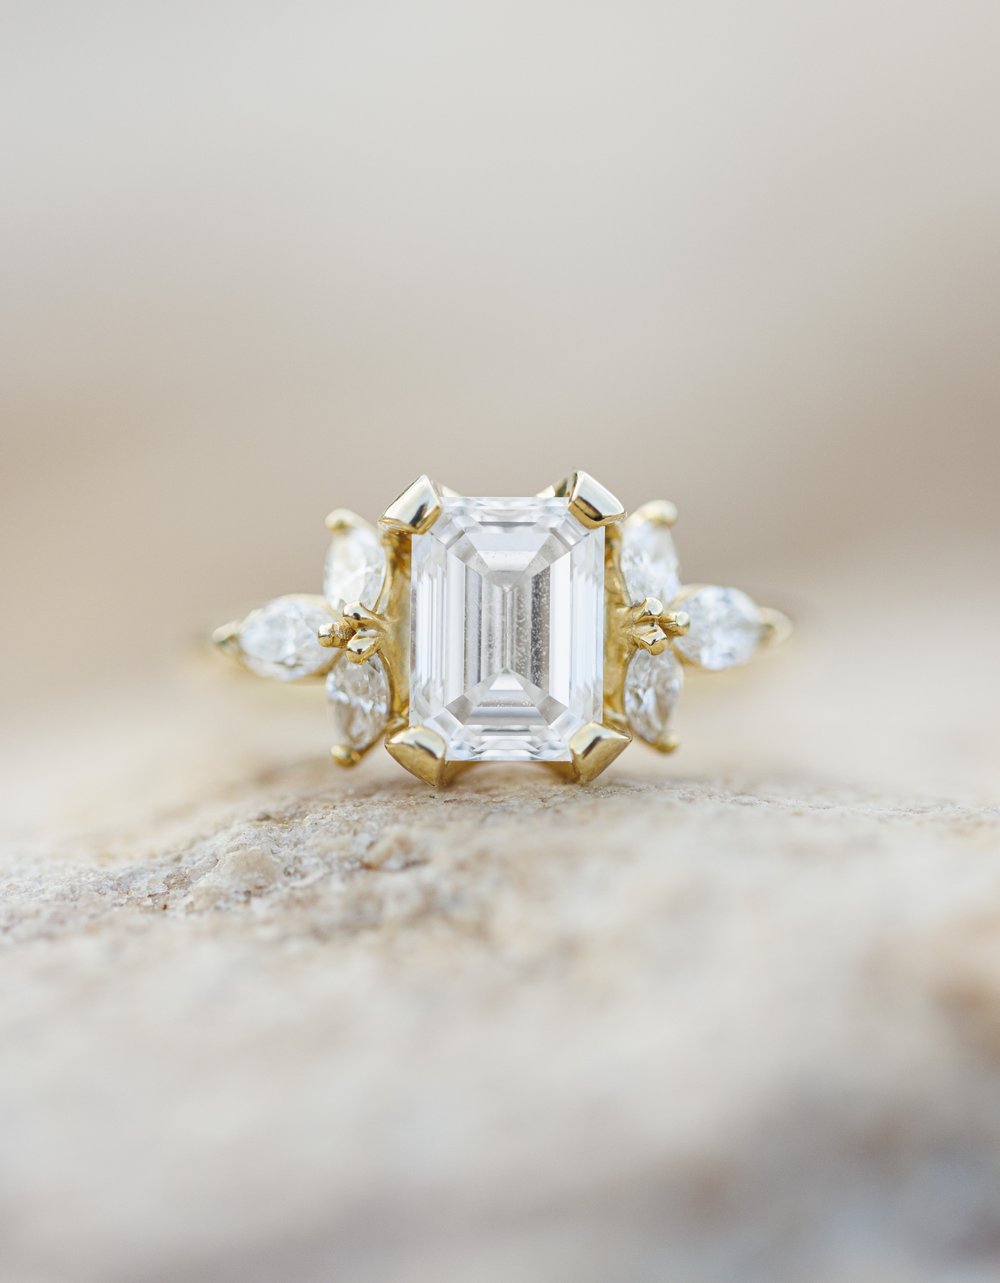  Gold rectangle engagement ring with detailed diamond sides by Savanna Richardson Photography. modern gold engagement ring simple diamond wedding ring engagement ring ideas #SavannaRichardsonPhotography #SavannaRichardsonEngagements #UtahEngagements 